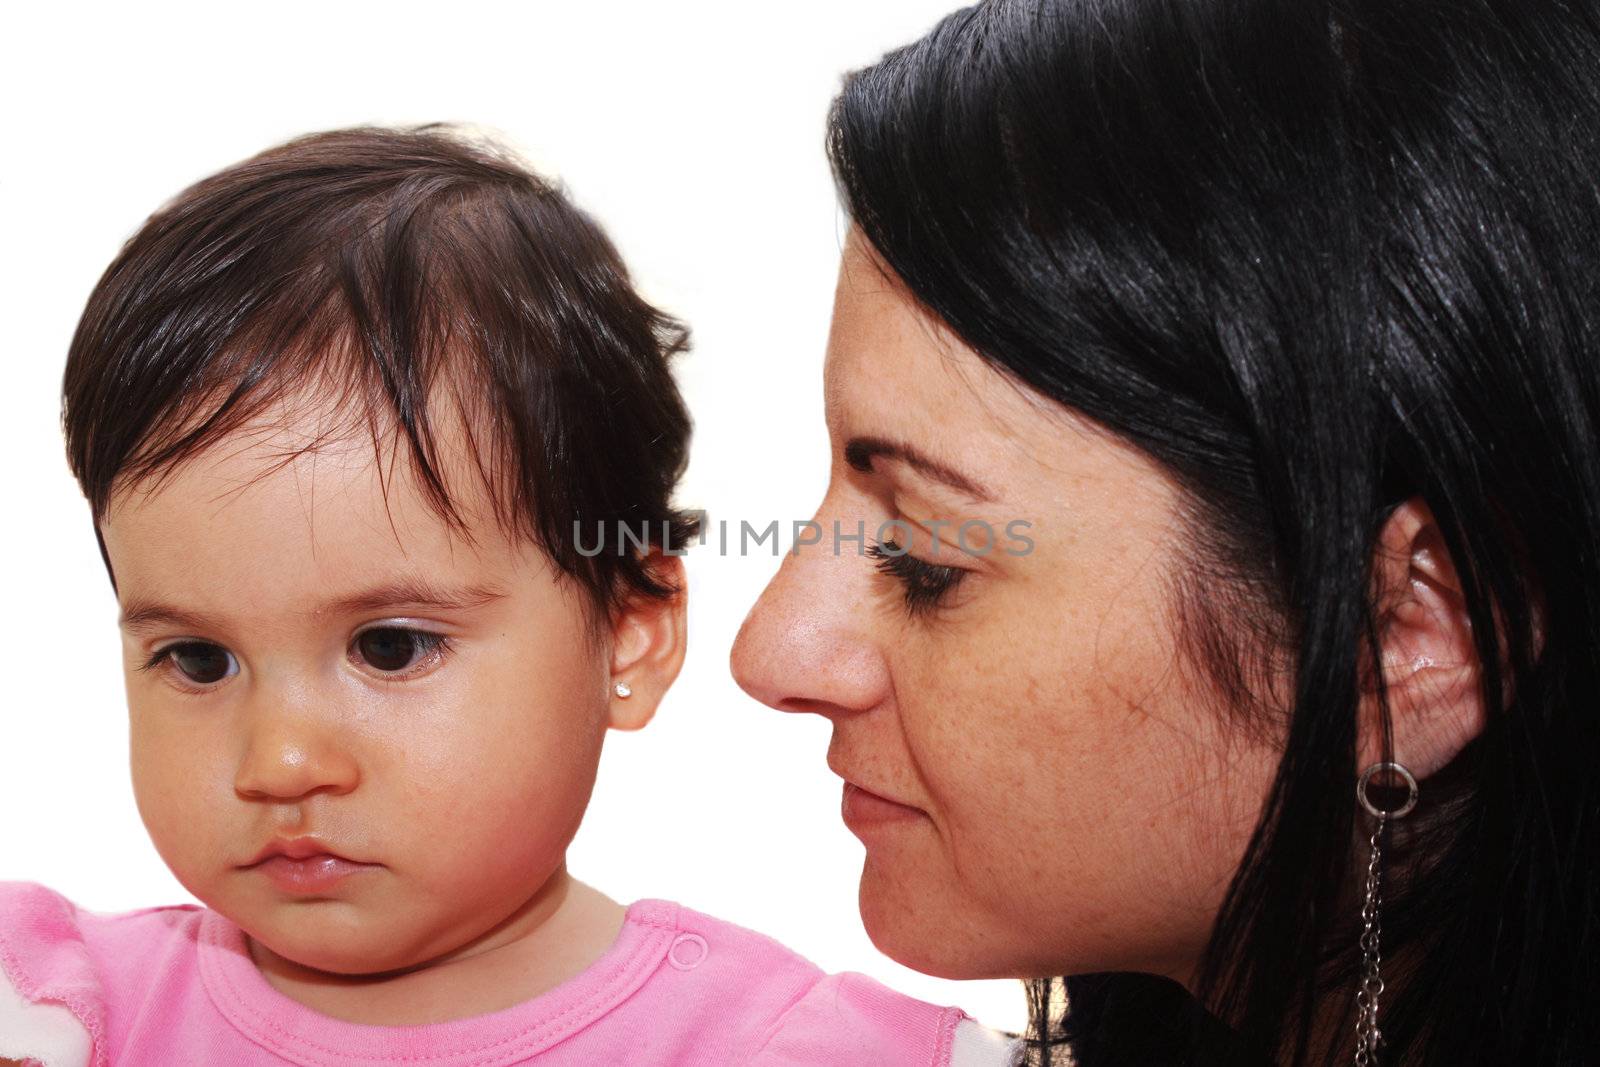 Images of mother with a child on a white background by dacasdo